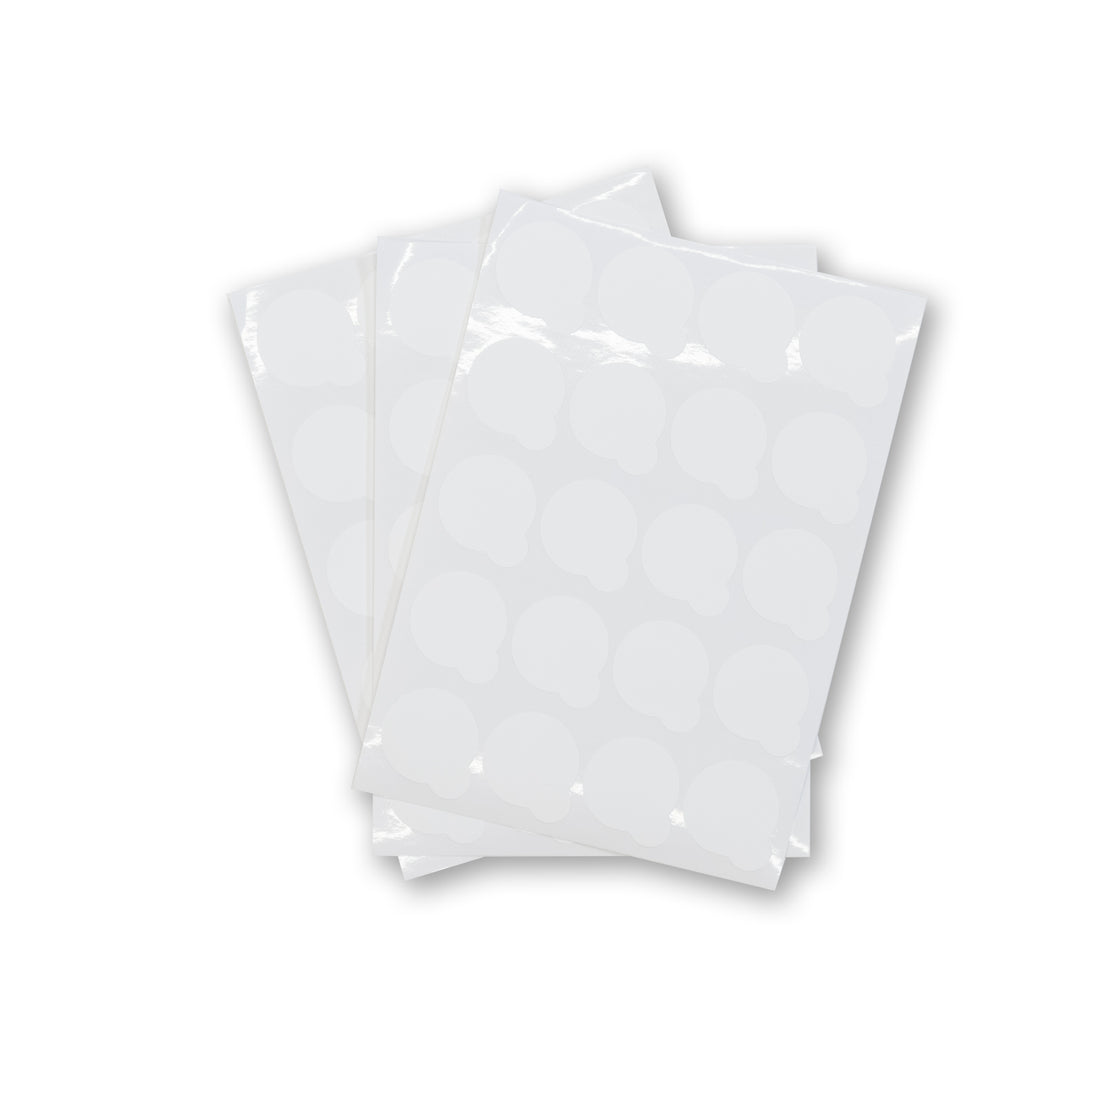 Sticker Covers- Disposable, Large and Small